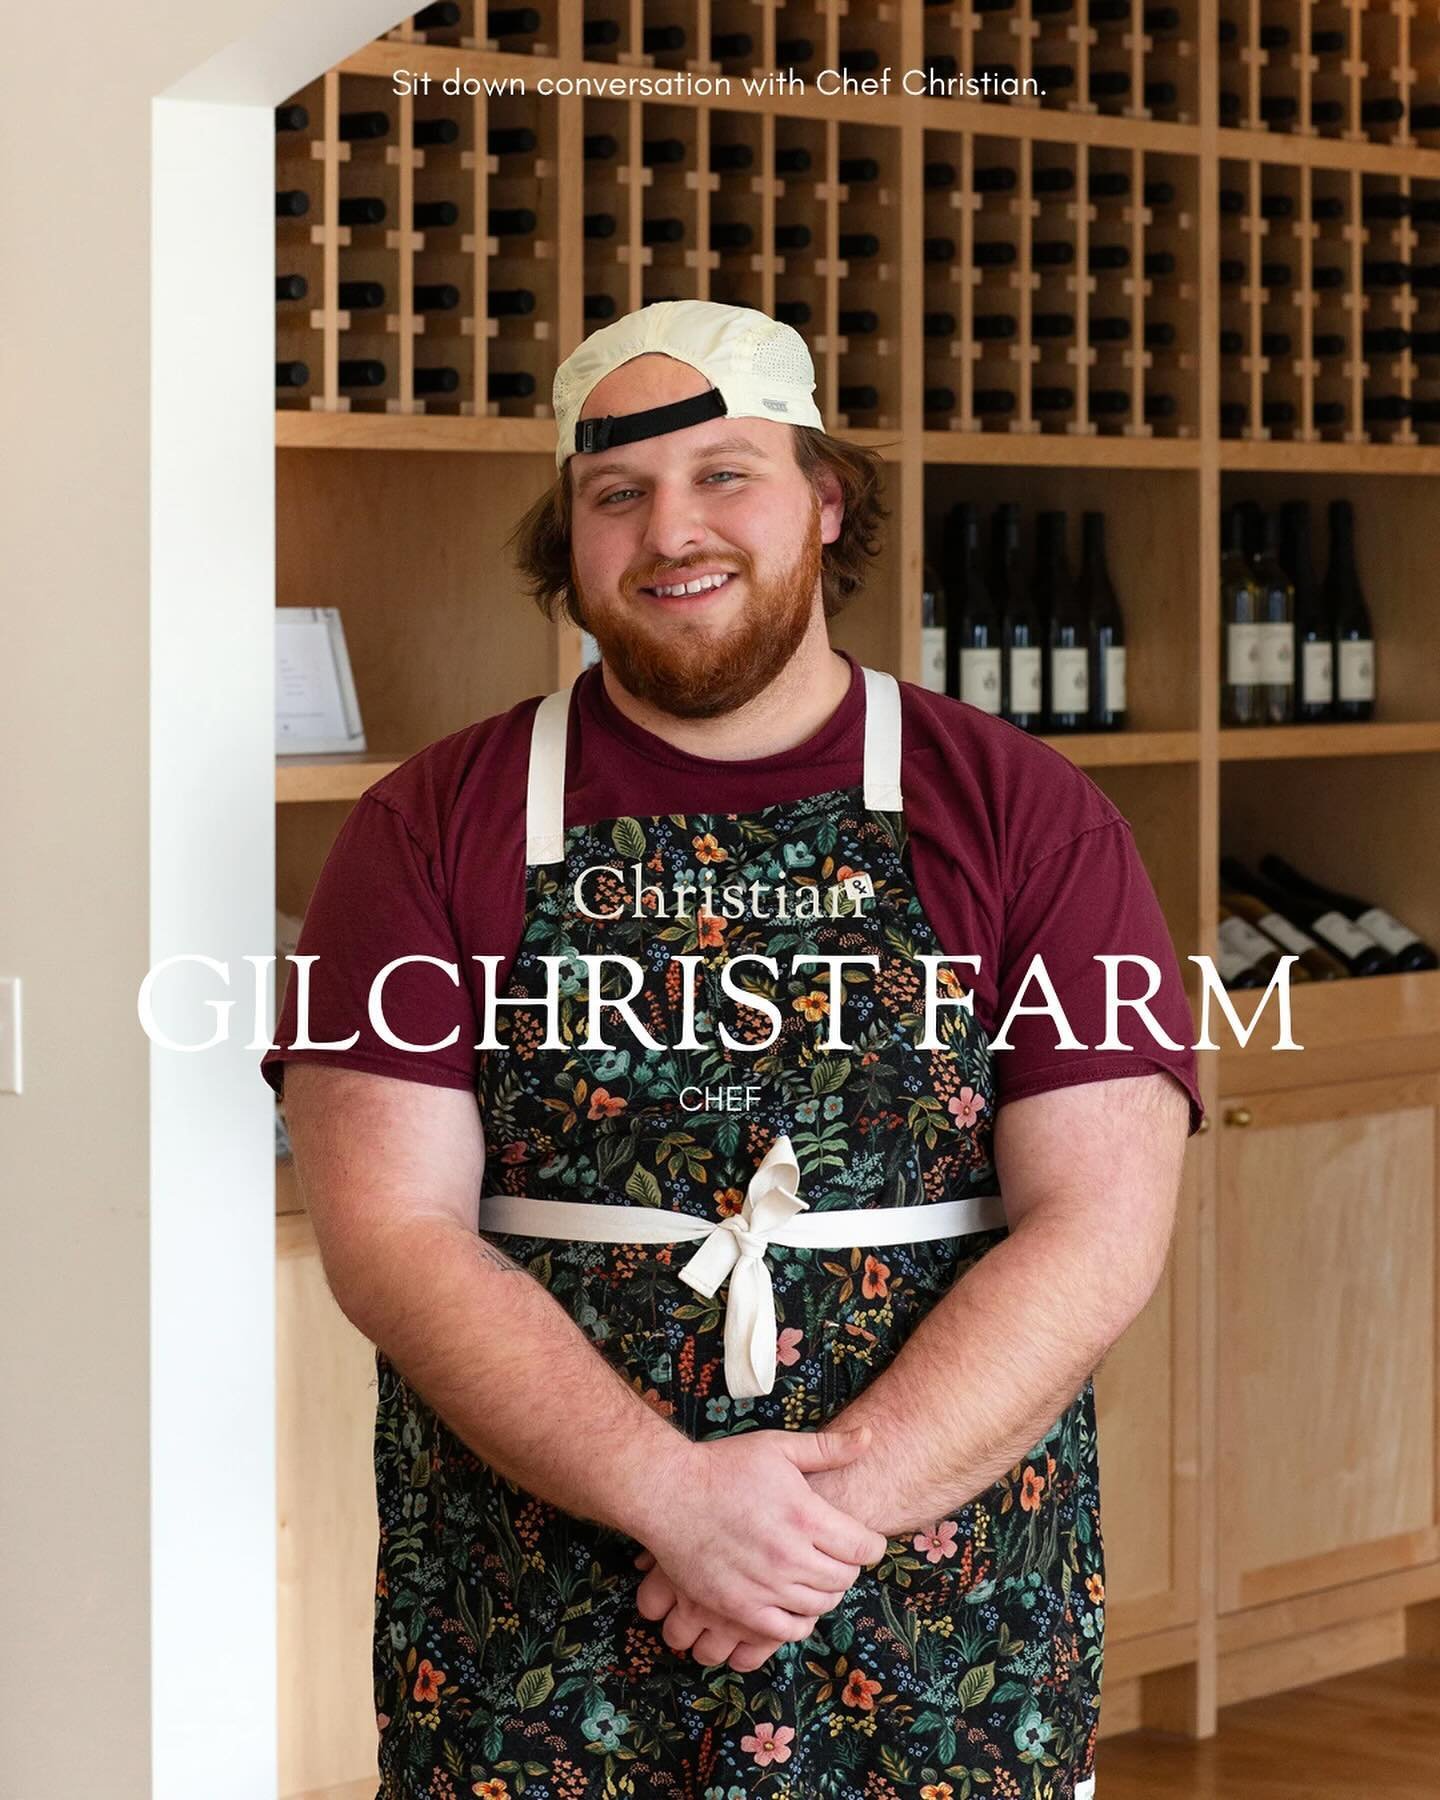 We&rsquo;re back again with our next installment of FRIDAY INTRODUCTIONS, and this time it&rsquo;s with Chef Christian.

We are incredibly fortunate to have the kitchen crew that we do, and we would like to take the time to highlight each of them.